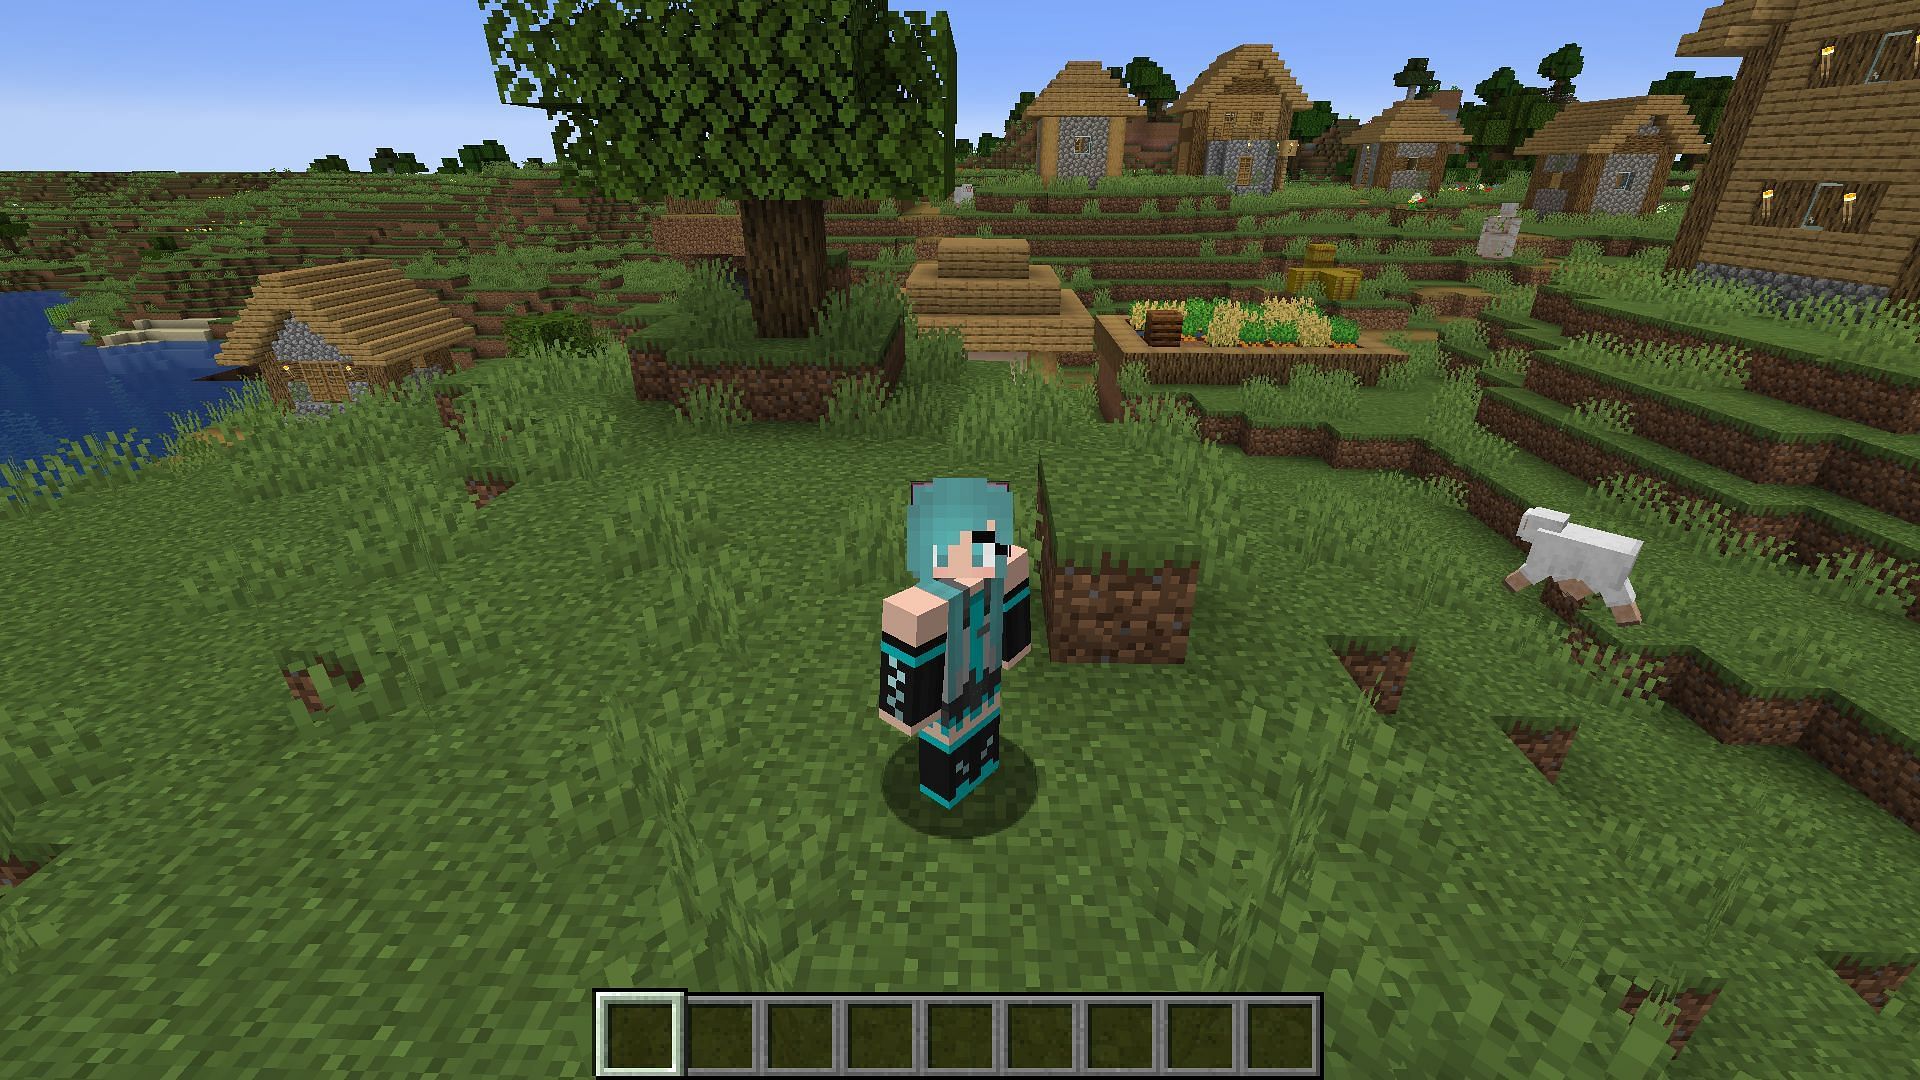 Adopt the appearance of the iconic idol by slipping on this skin (Image via Mojang)